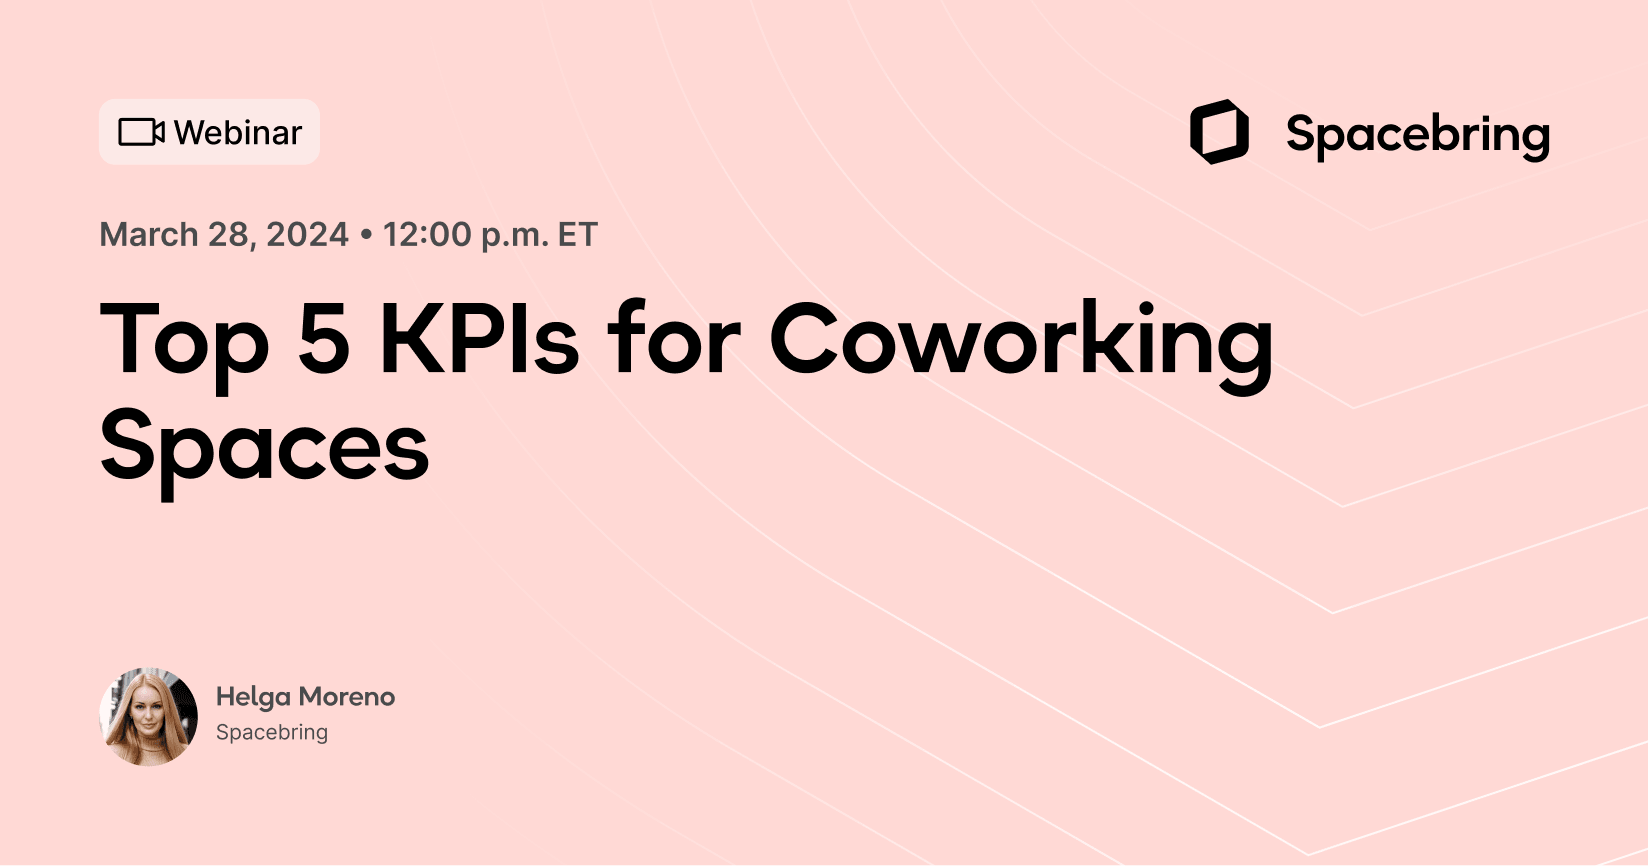 Top 5 KPIs for Coworking Spaces